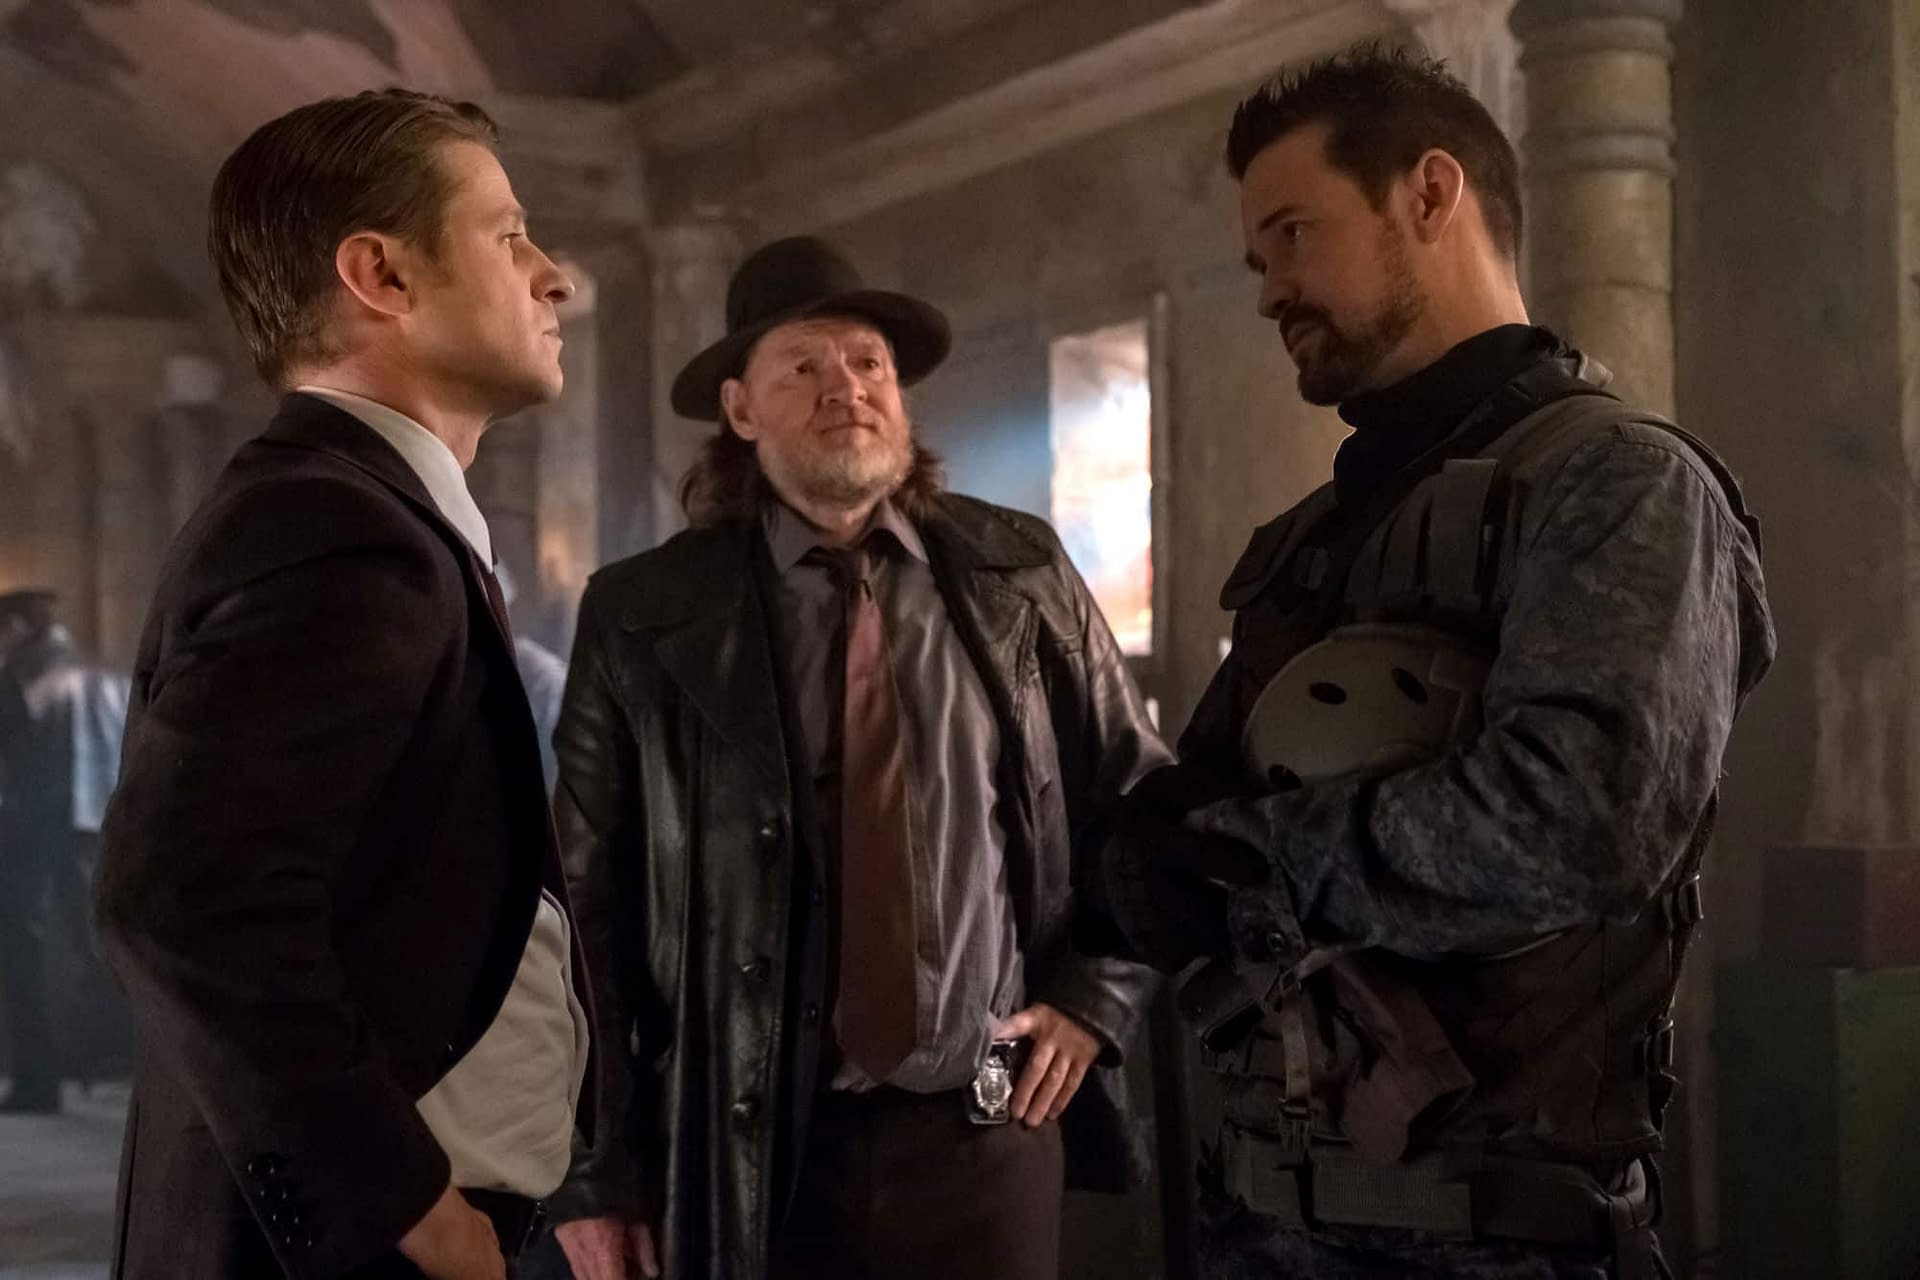 A "Baneful" Existence Begins for 'Gotham' in "Pena Dura" [PREVIEW]